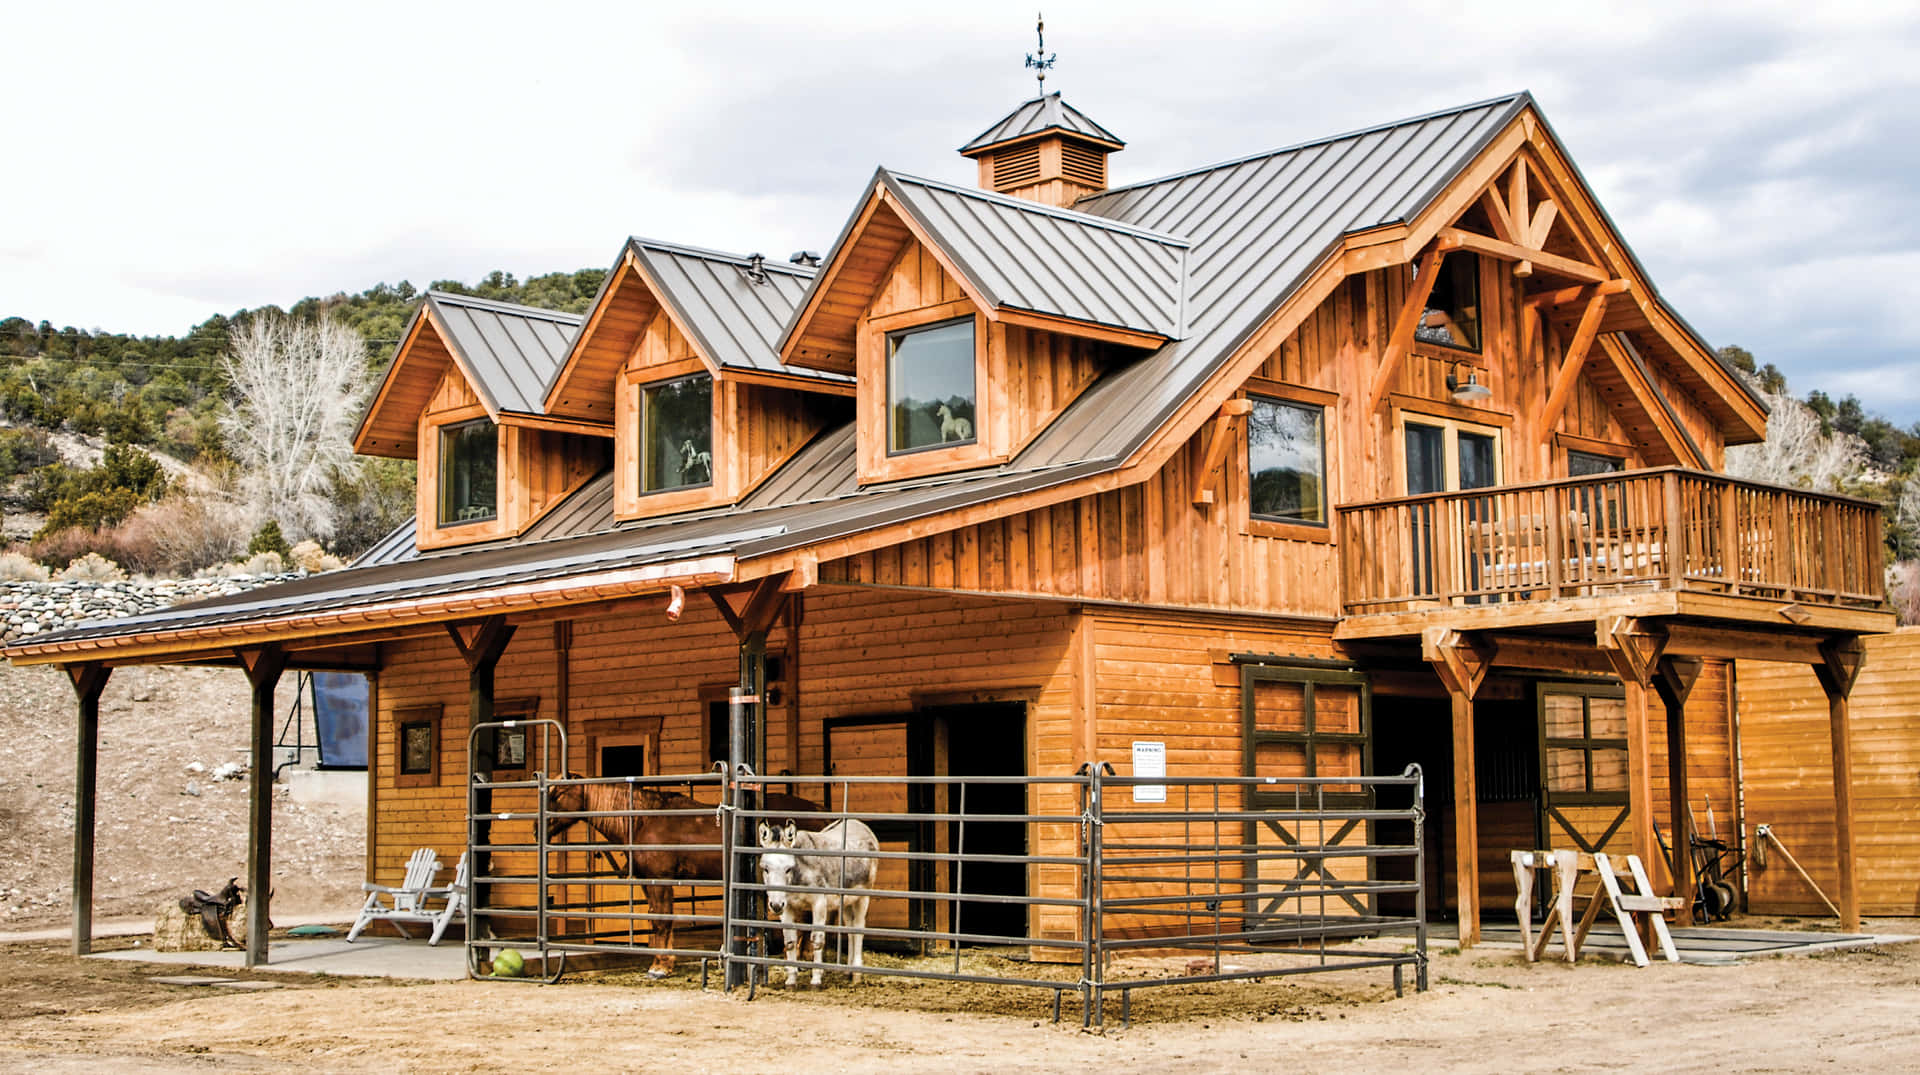 Wood Finished Barndominium With Horse Pictures 2400 x 1344 Picture